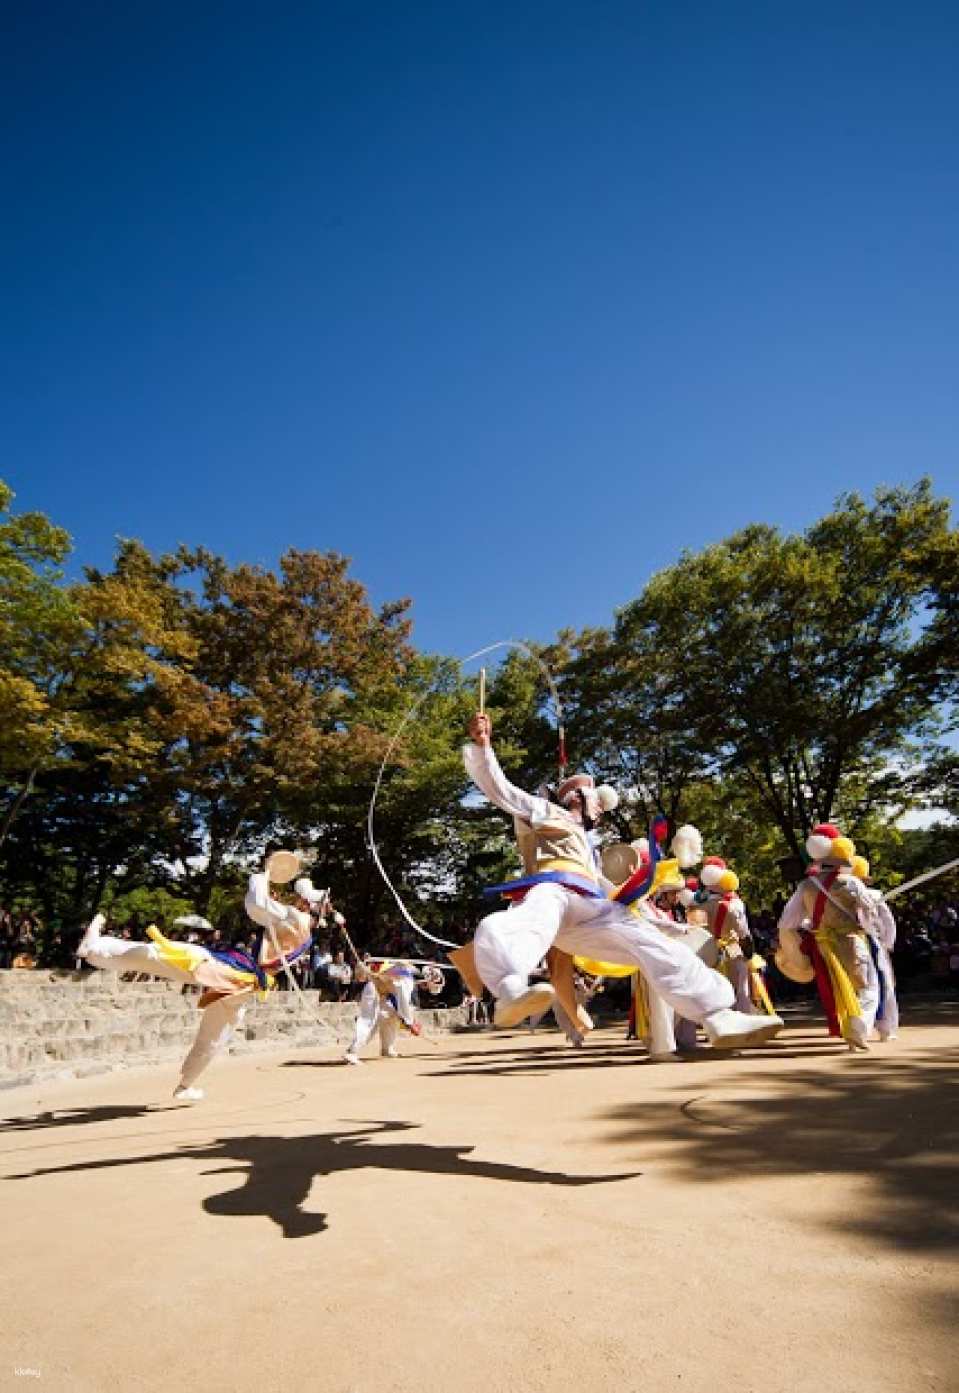 Enjoy free Korean Folk Village activities and have lunch (at your own expense)